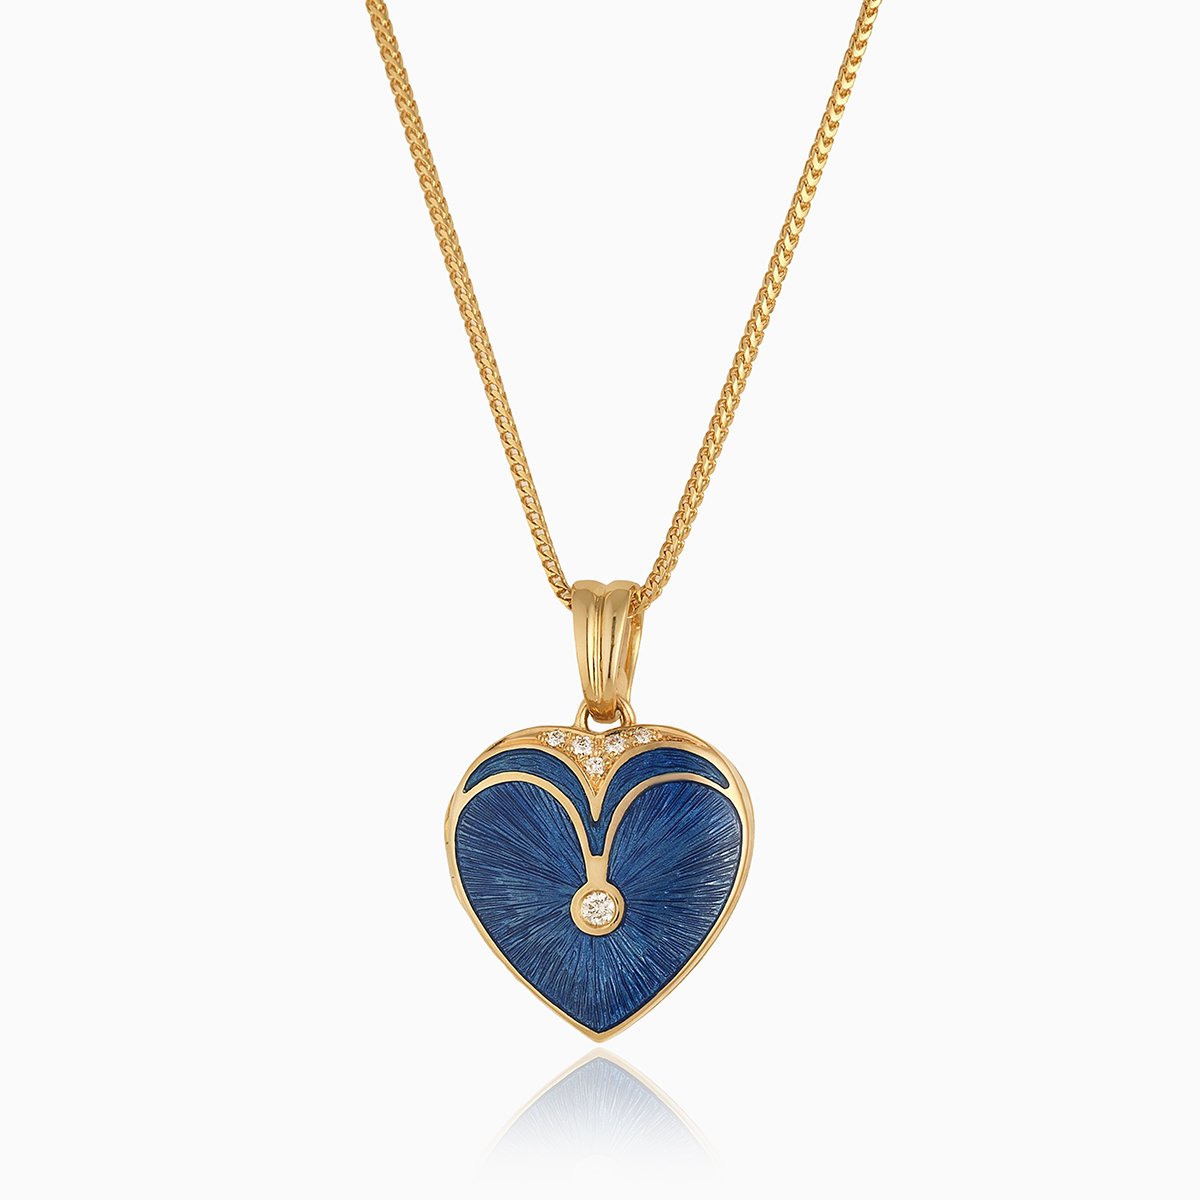 18 ct gold heart locket set with blue guilloche enamel and diamonds on an 18 ct gold franco chain